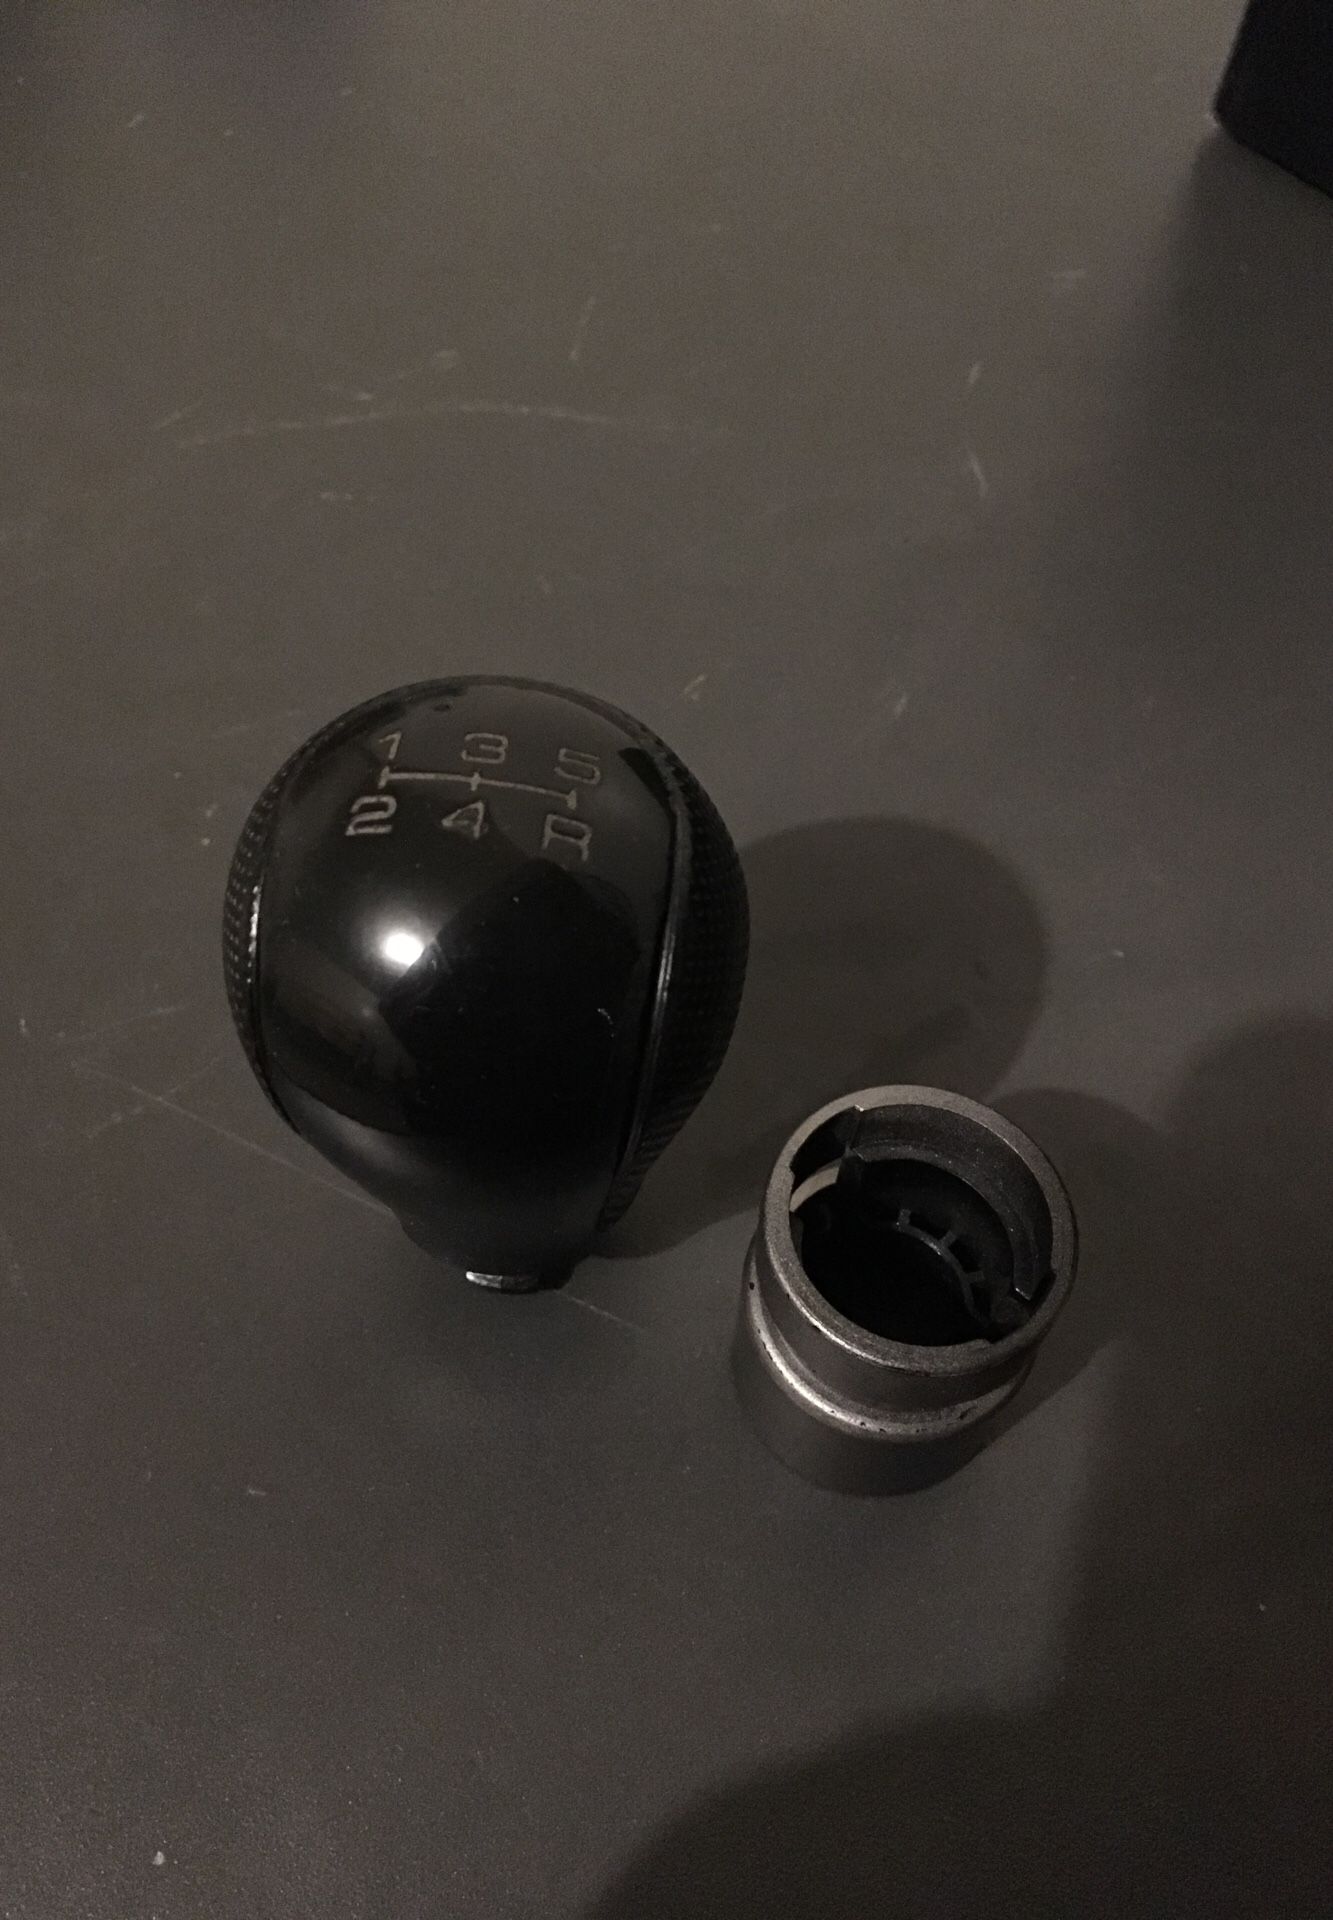 Acura Rsx 5 speed shift knob with boot/shaft cover